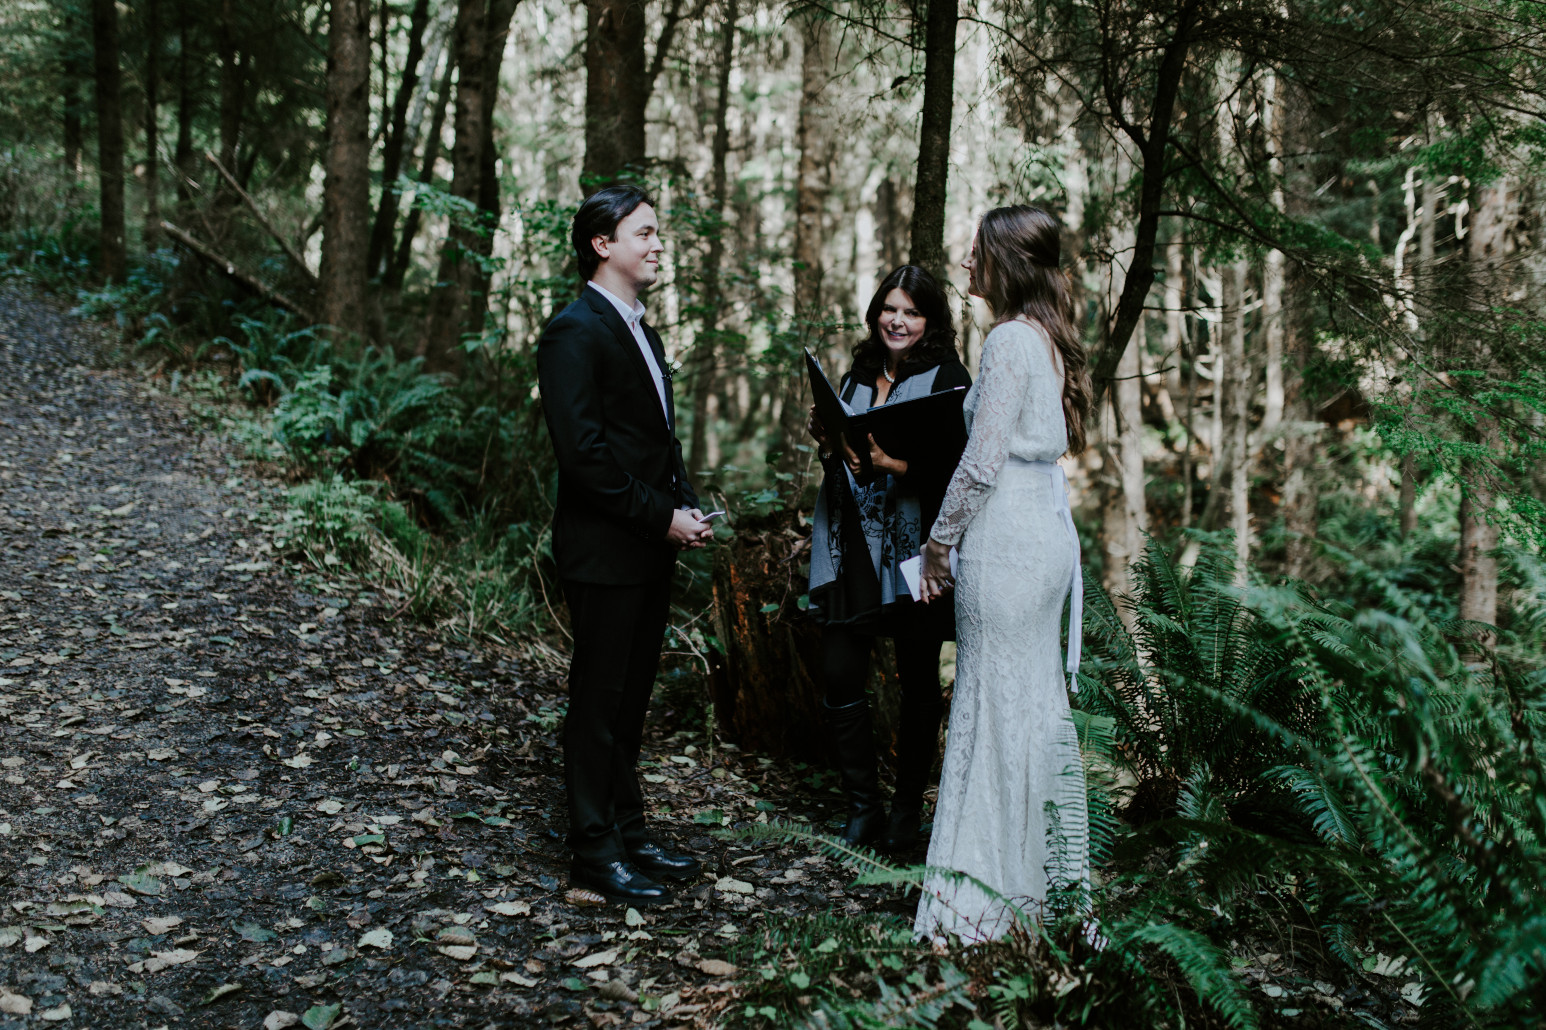 Nicole and Vlad during their elopement ceremony at Cannon Beach. Elopement wedding photography at Cannon Beach by Sienna Plus Josh.